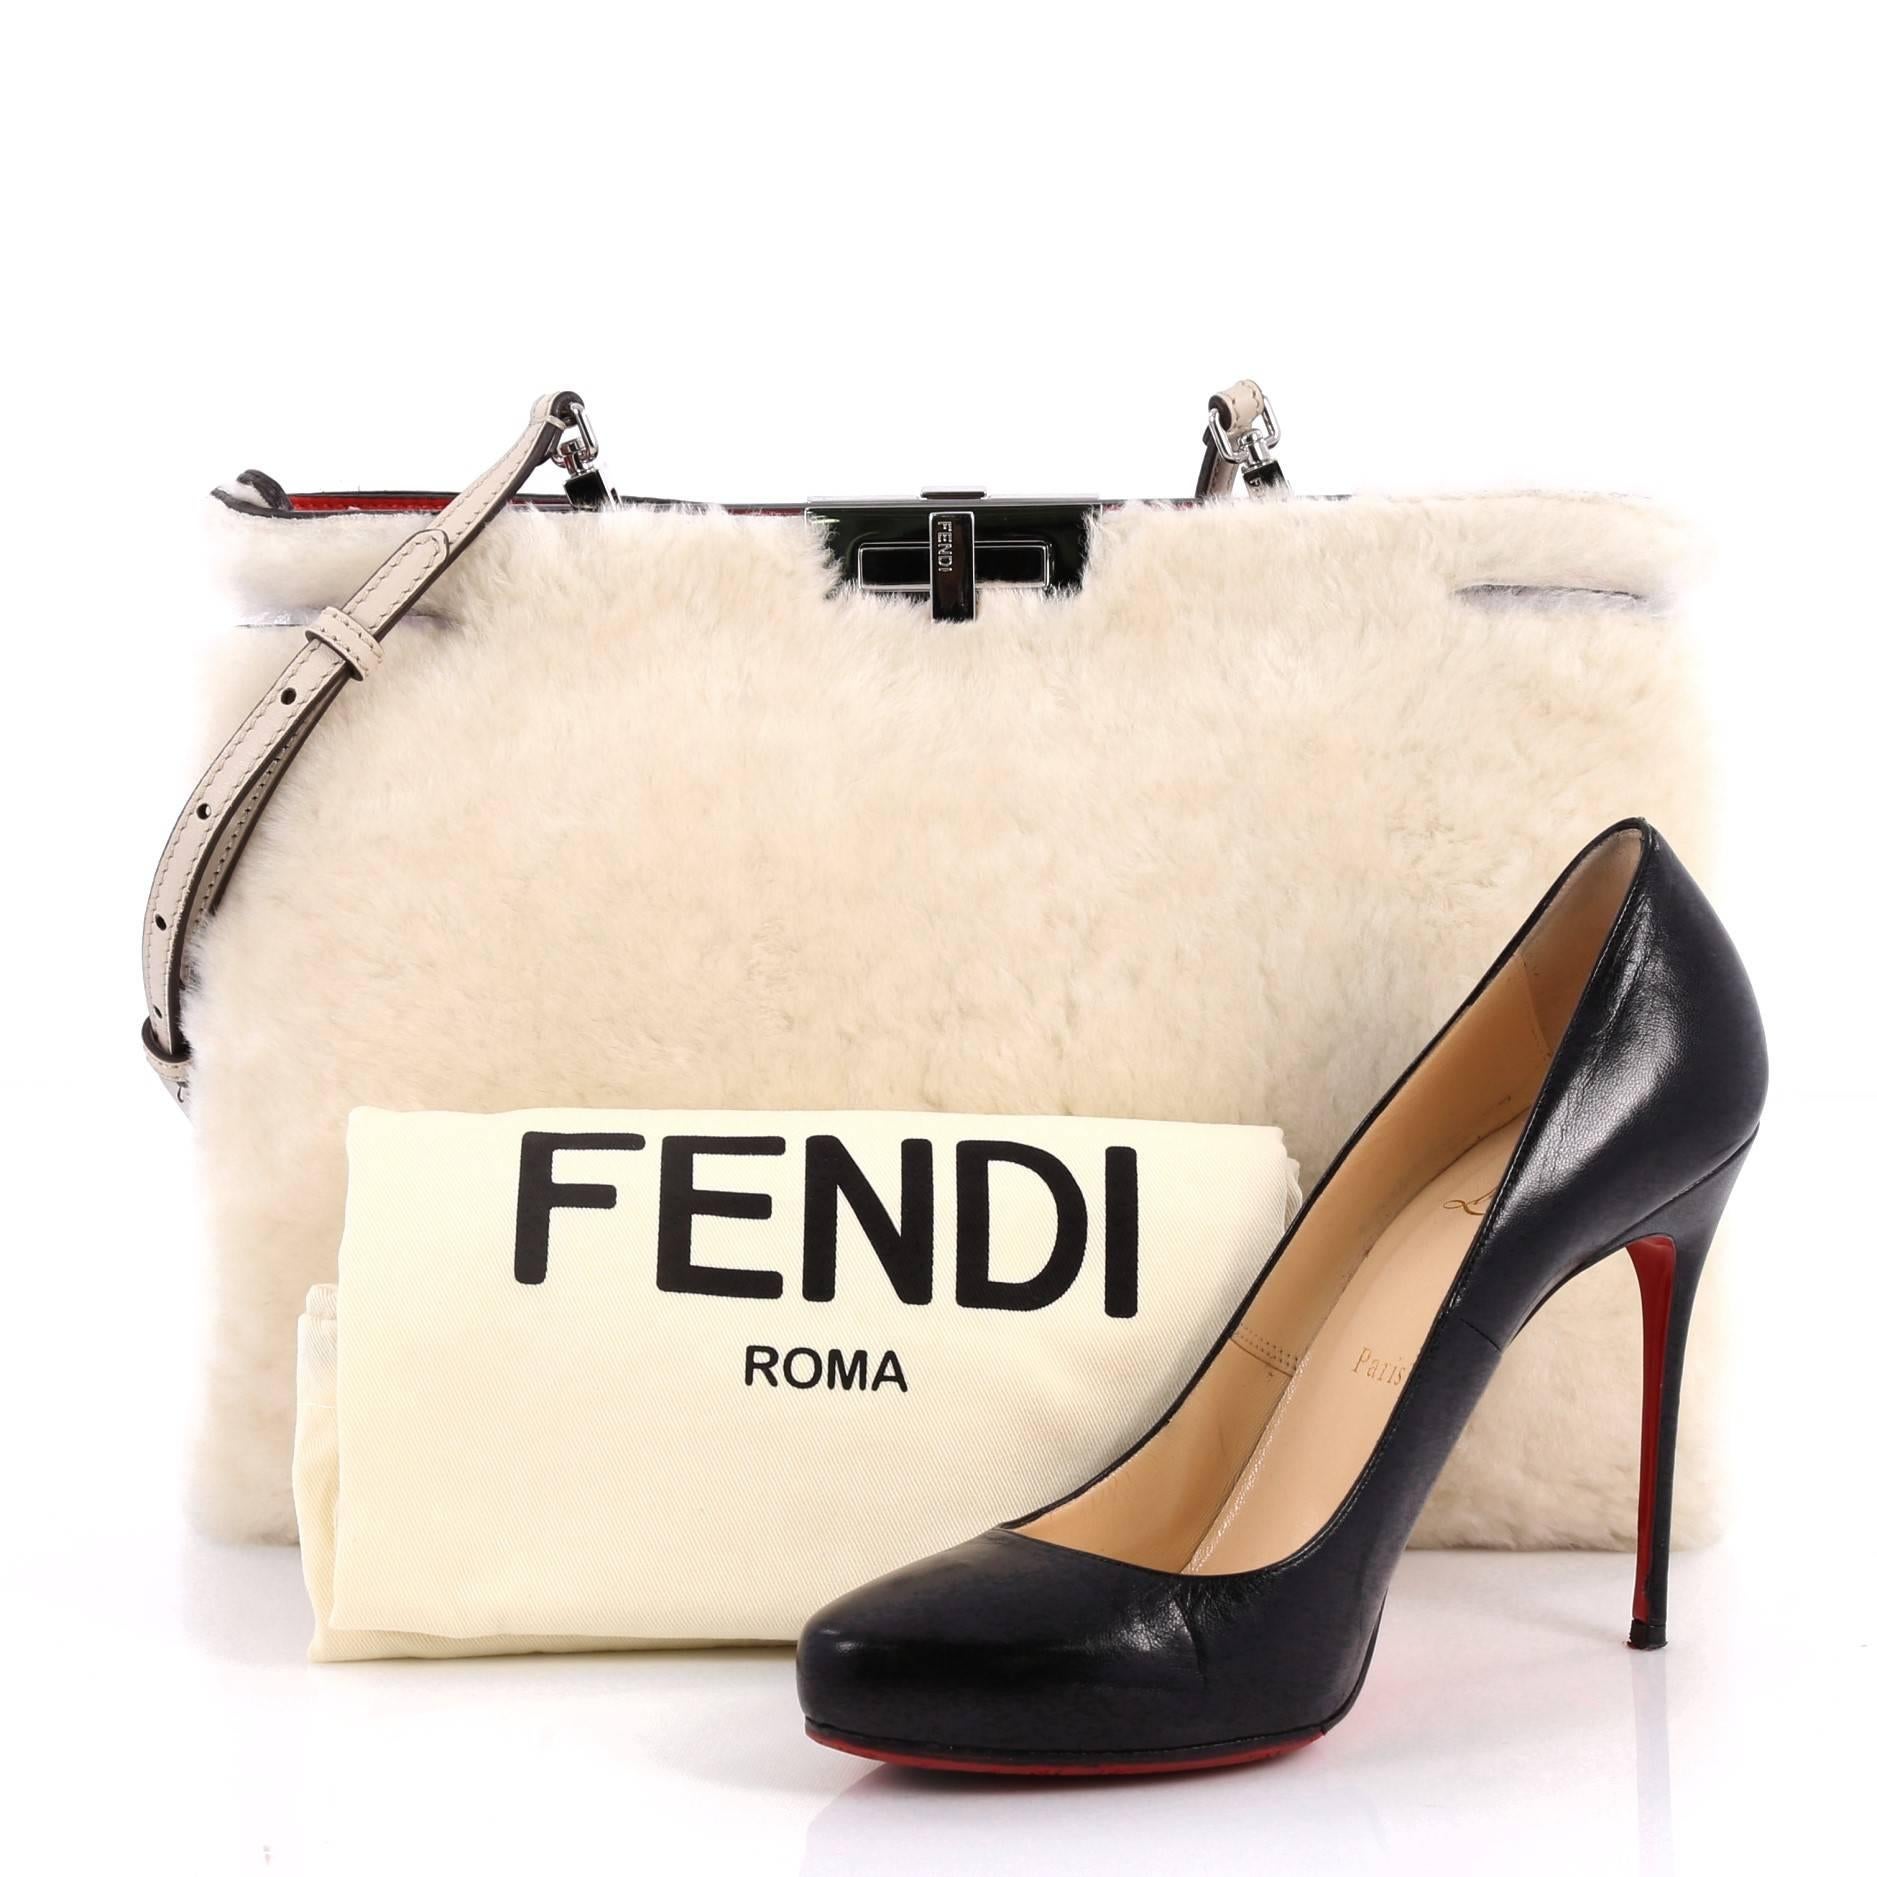 This authentic Fendi Peekaboo Clutch Bag Shearling is a chic and stylish bag perfect for your nights out. Crafted in off-white shearling, this clutch features a framed top with turn-lock closure, detachable shoulder strap, and silver-tone hardware